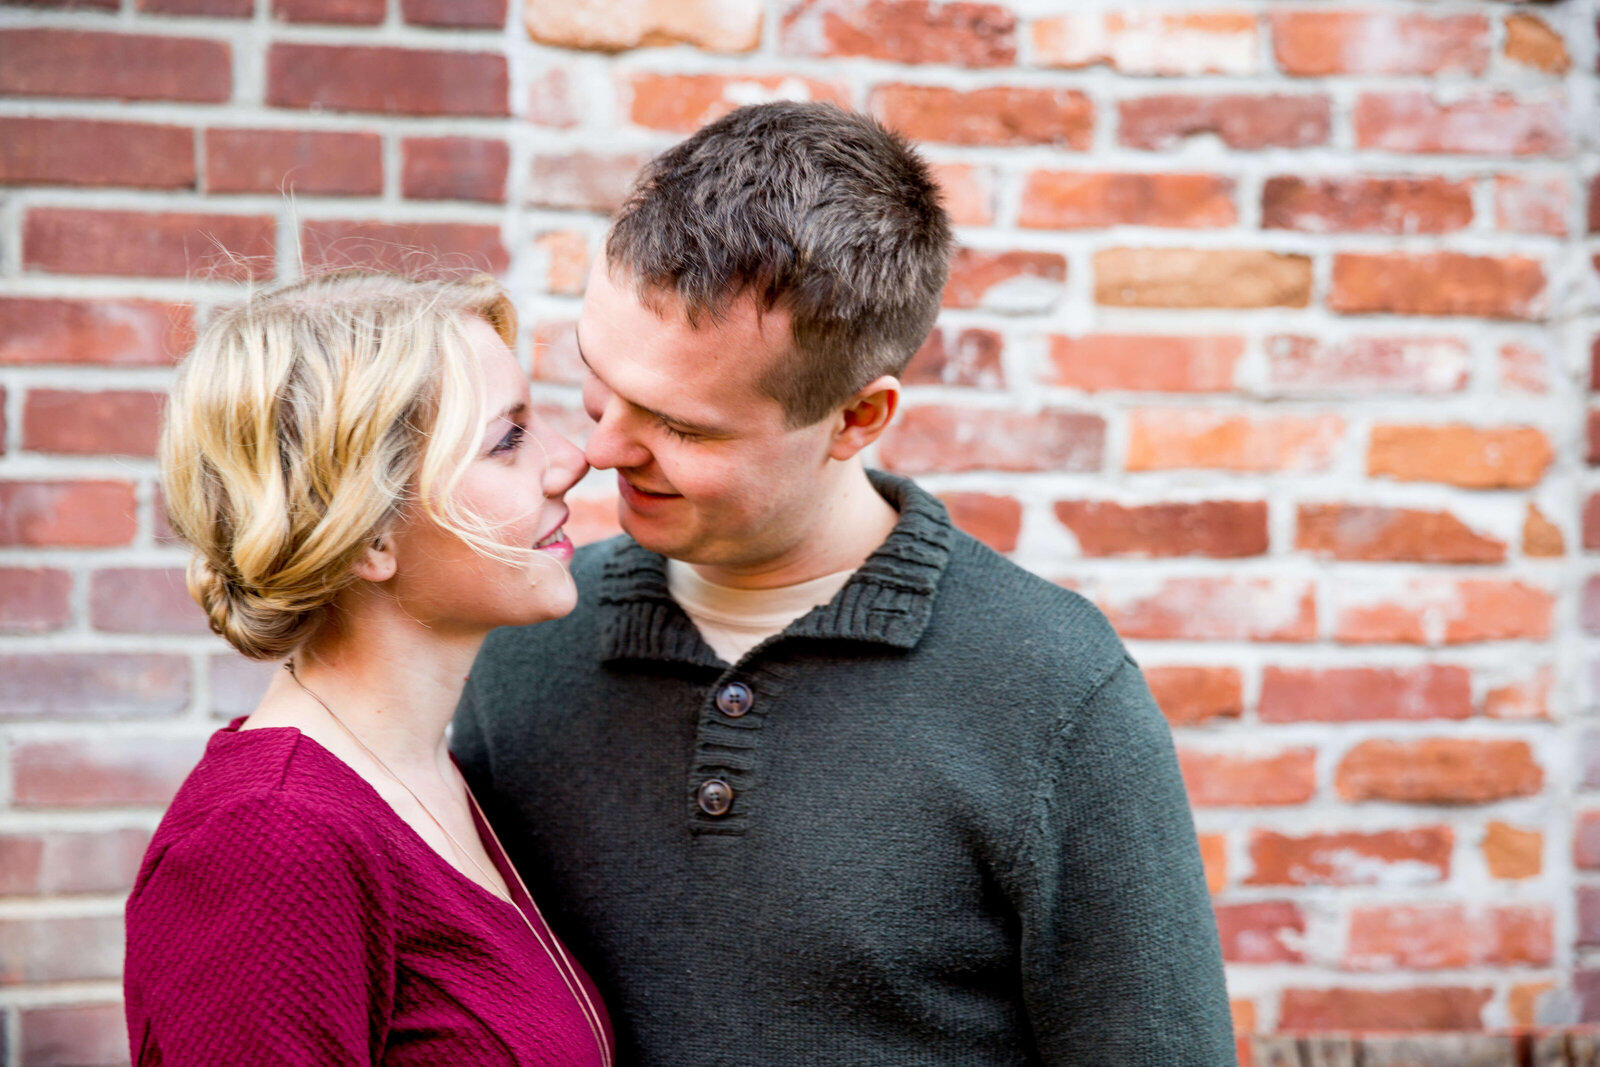 Couple smile at each other with brick background.